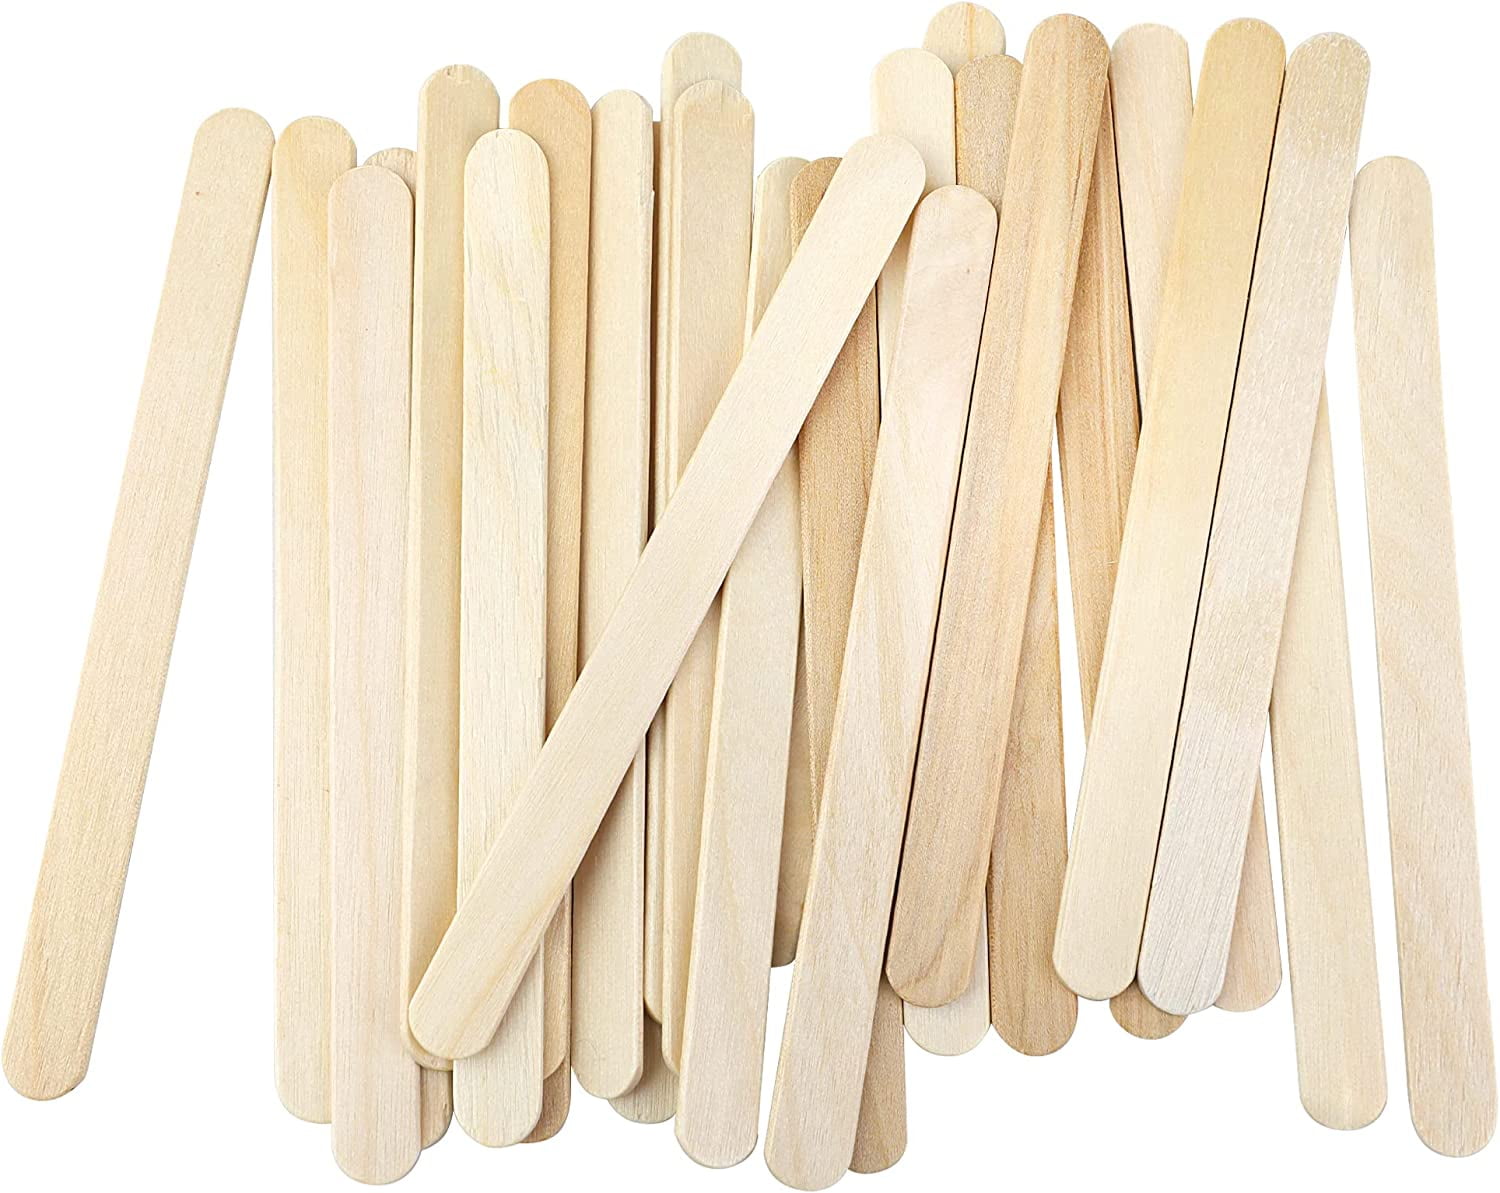 Colored Popsicle Sticks for Crafts - 200 Count 4.5 inch Multi-Purpose Wooden Sticks